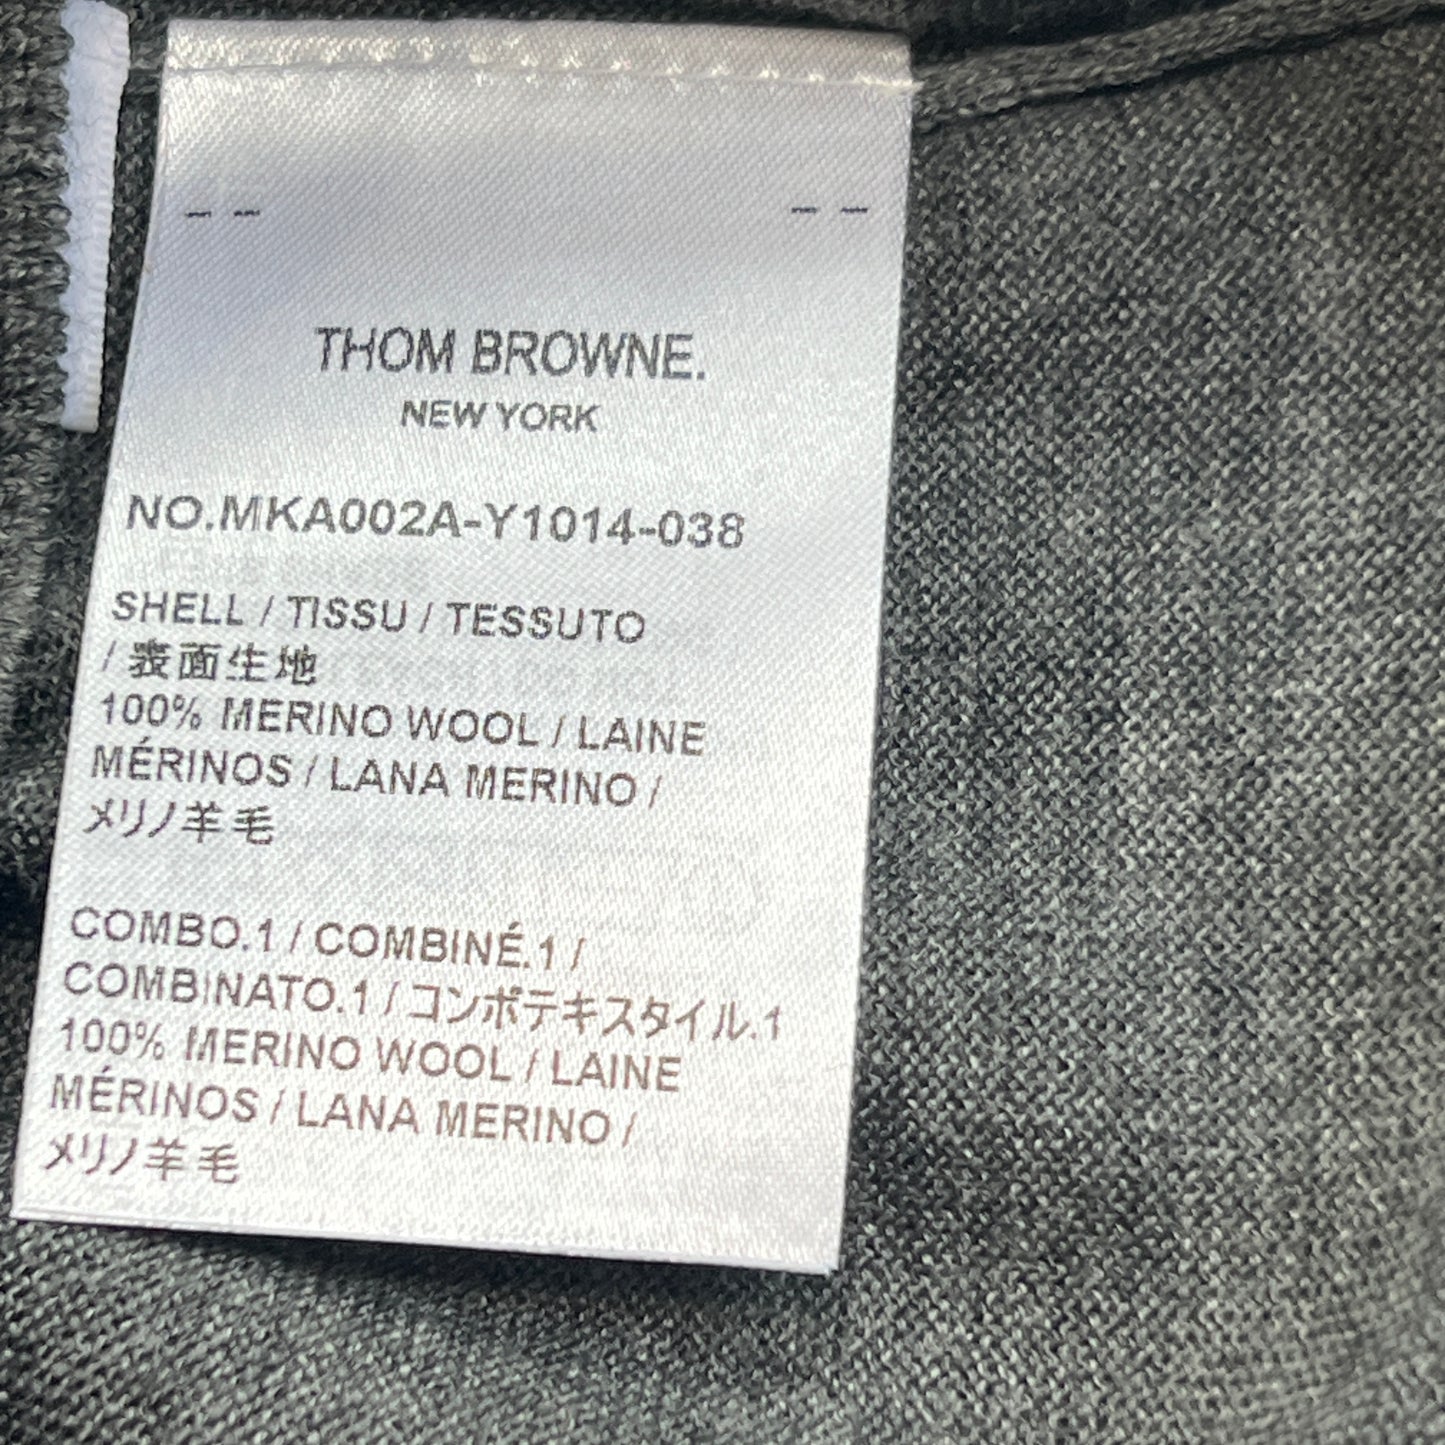 THOM BROWNE New York Classic Crewneck Pullover w/4 Bar Sleeve in Sustainable Fine Merino Wool Med Grey Size 4 (New)